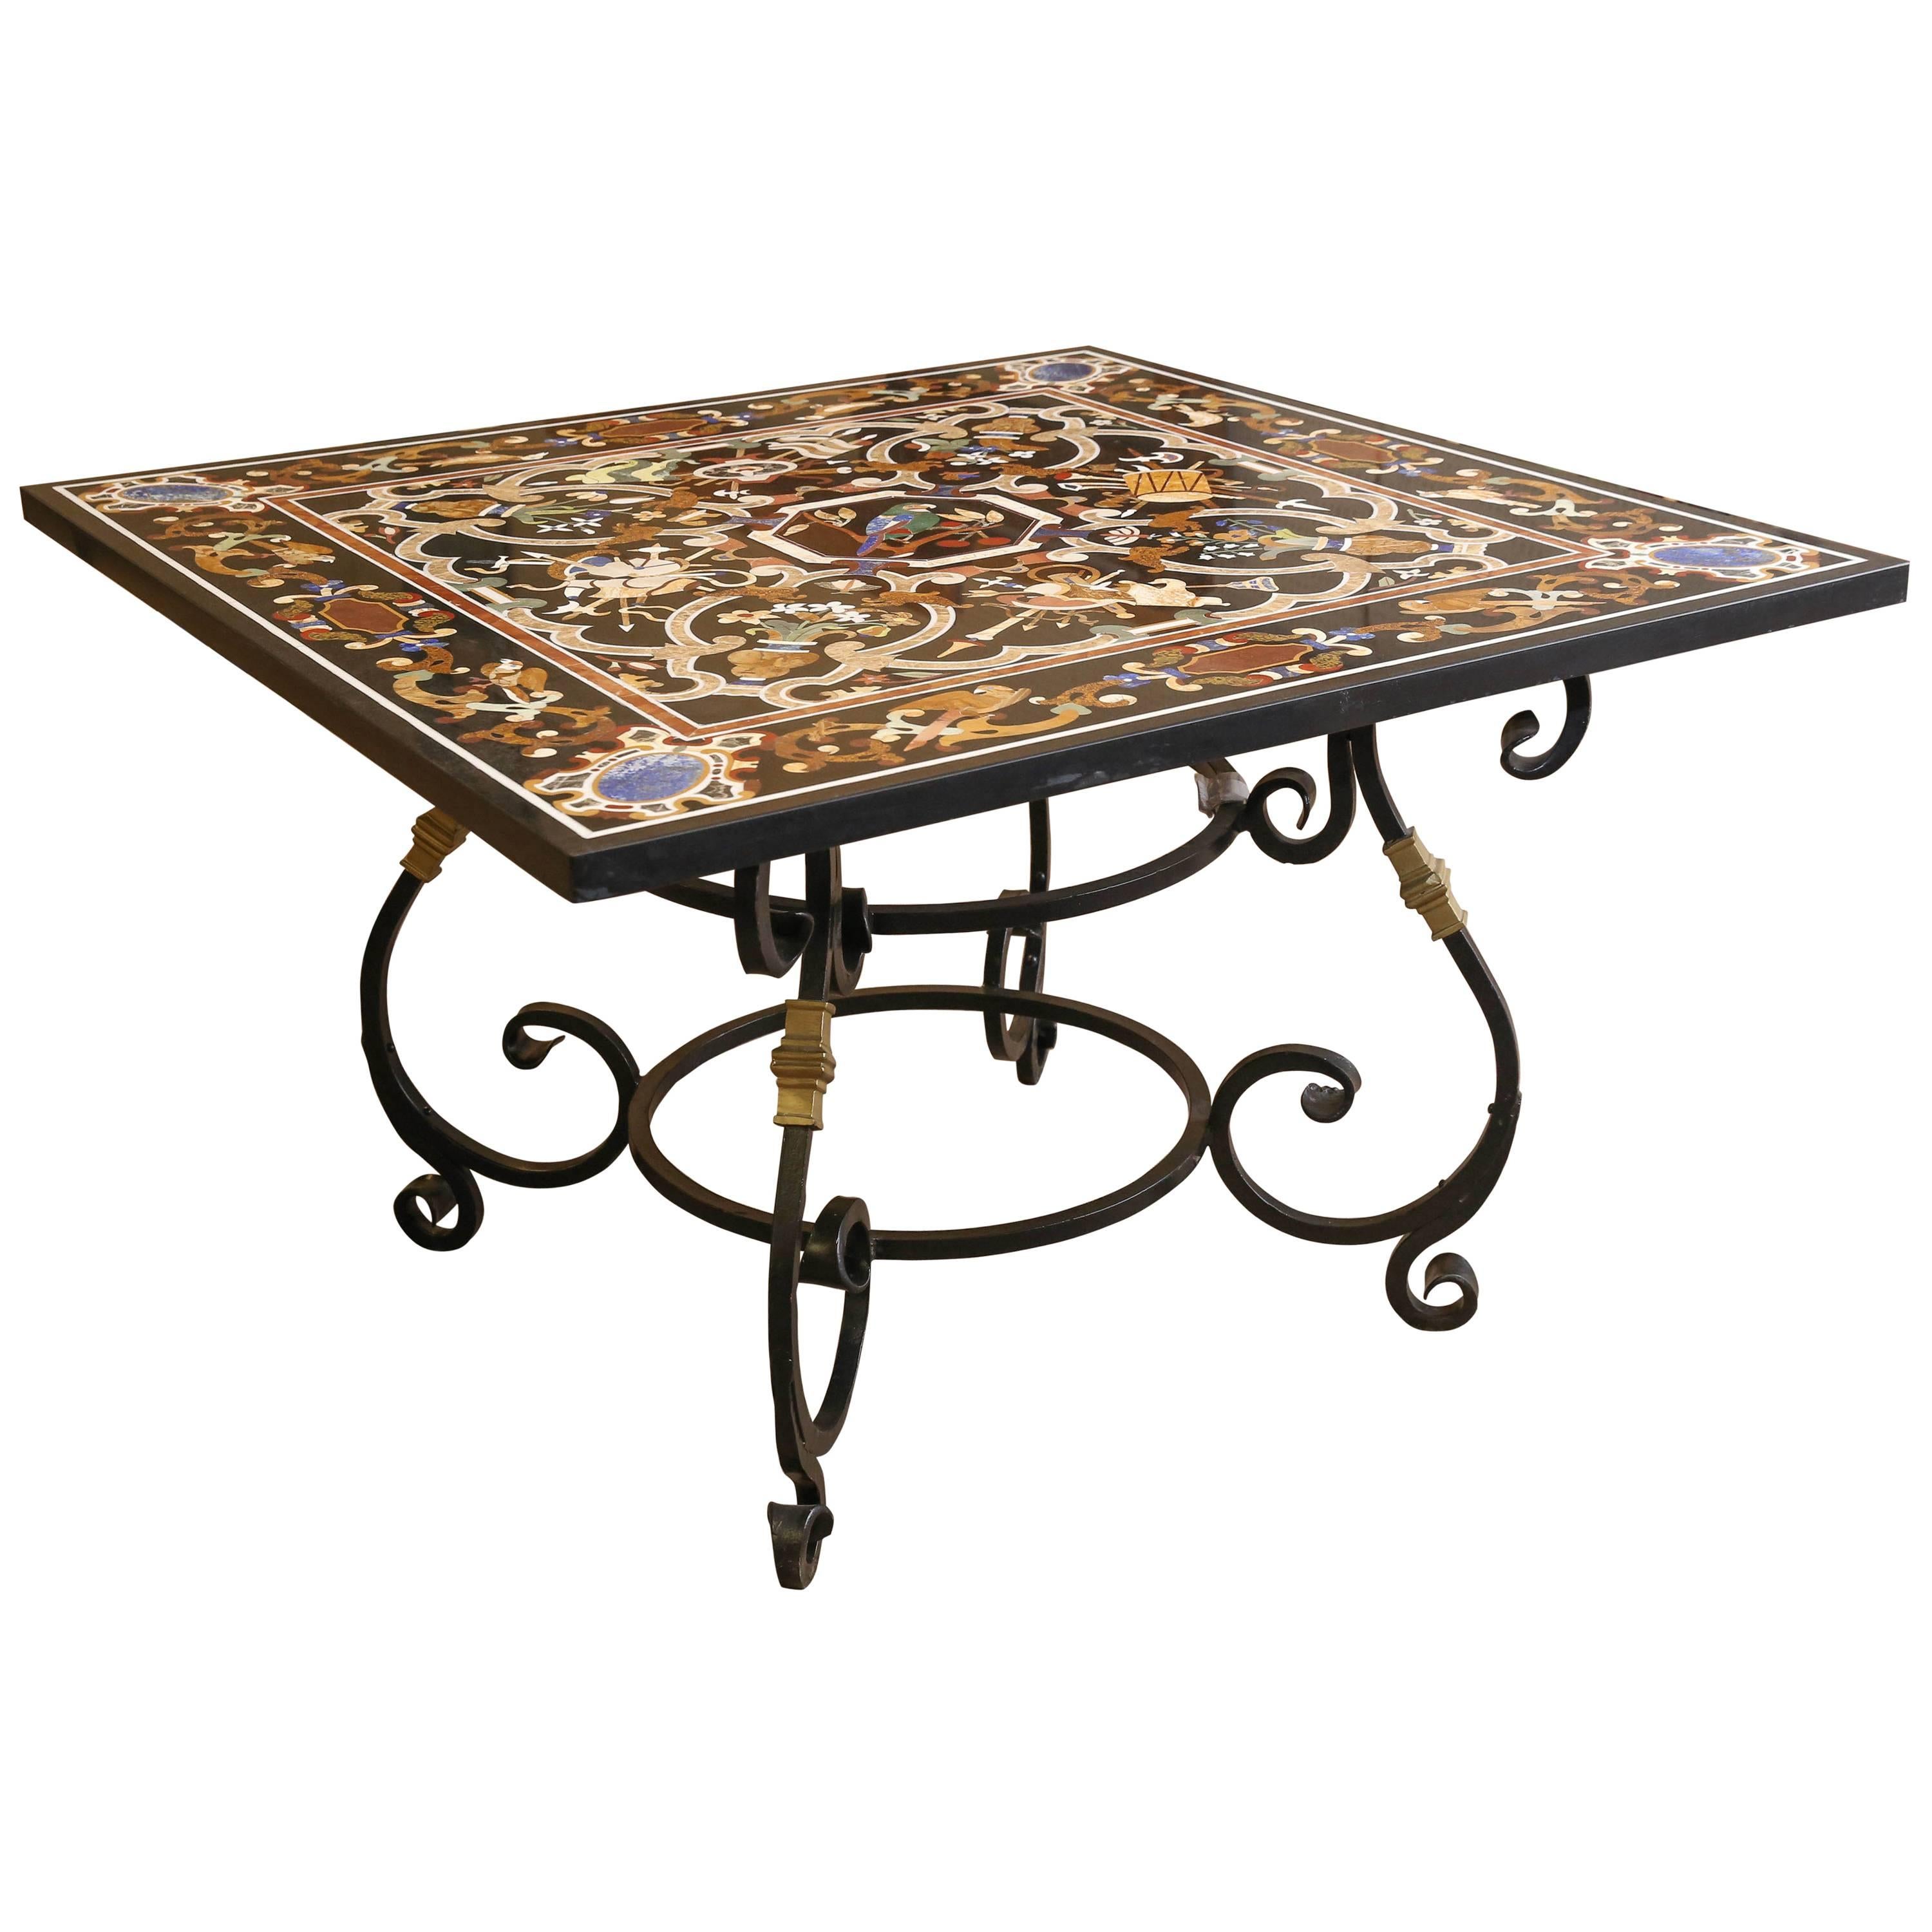 Fine Pietra-Dura Square Black Marble Table with Intricate Inlay Work